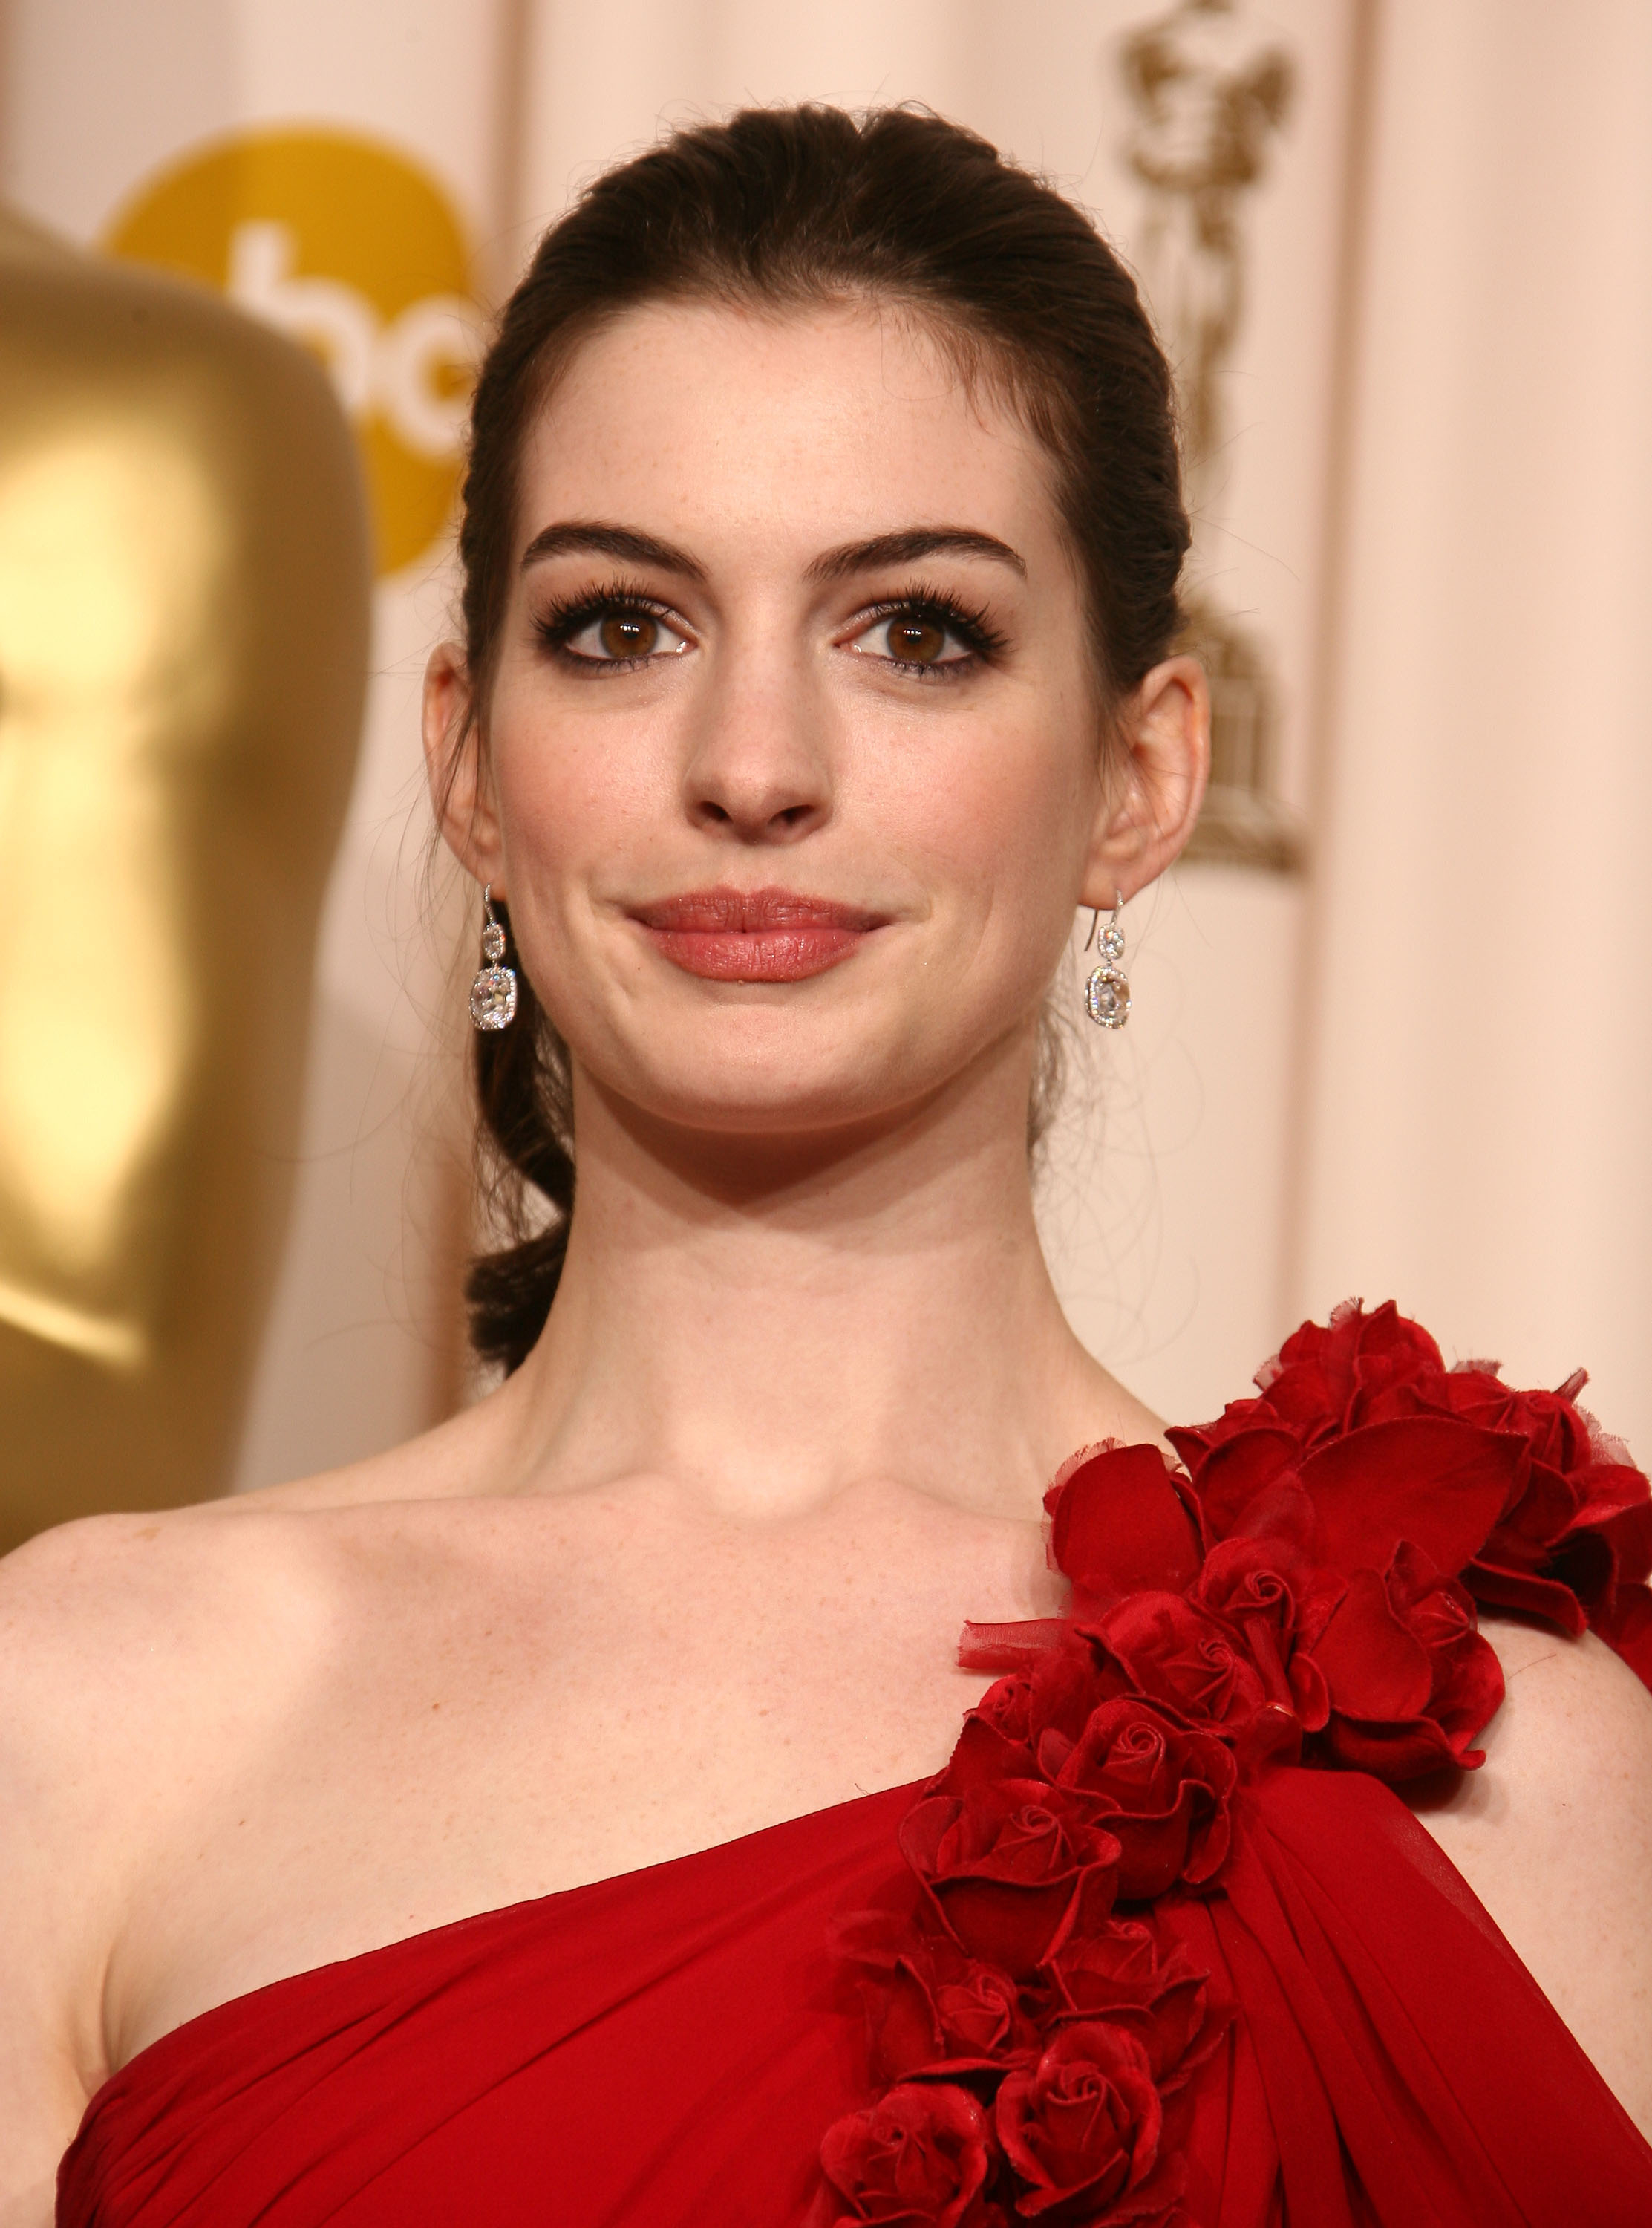 Anne Hathaway in a red gown with floral shoulder detail at an award event